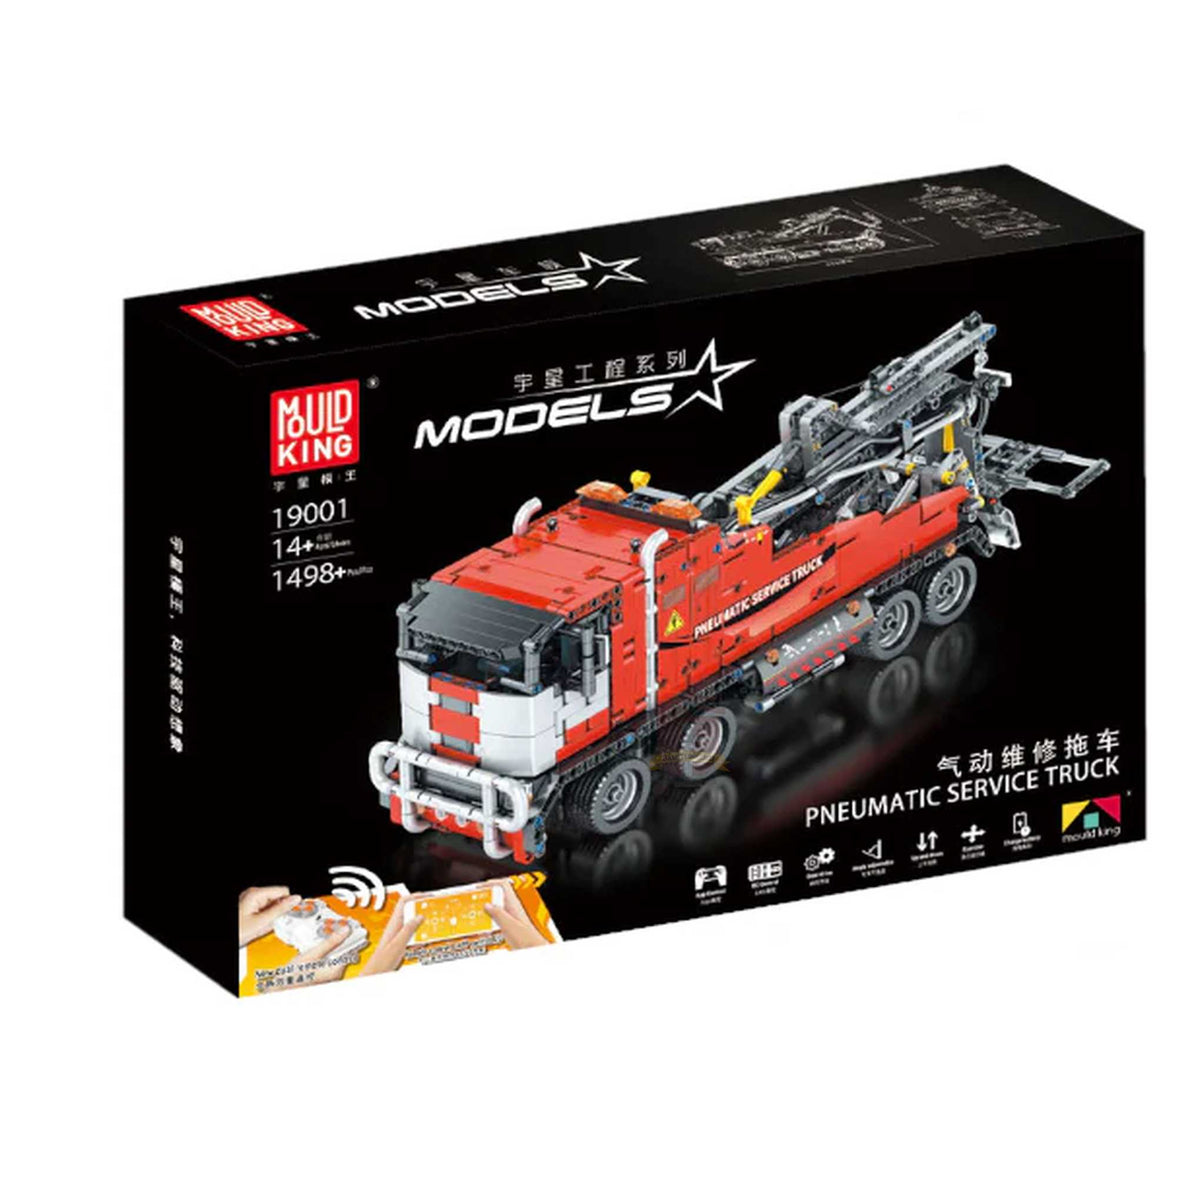 19001 - RC Pneumatic Service Truck (Mould King)